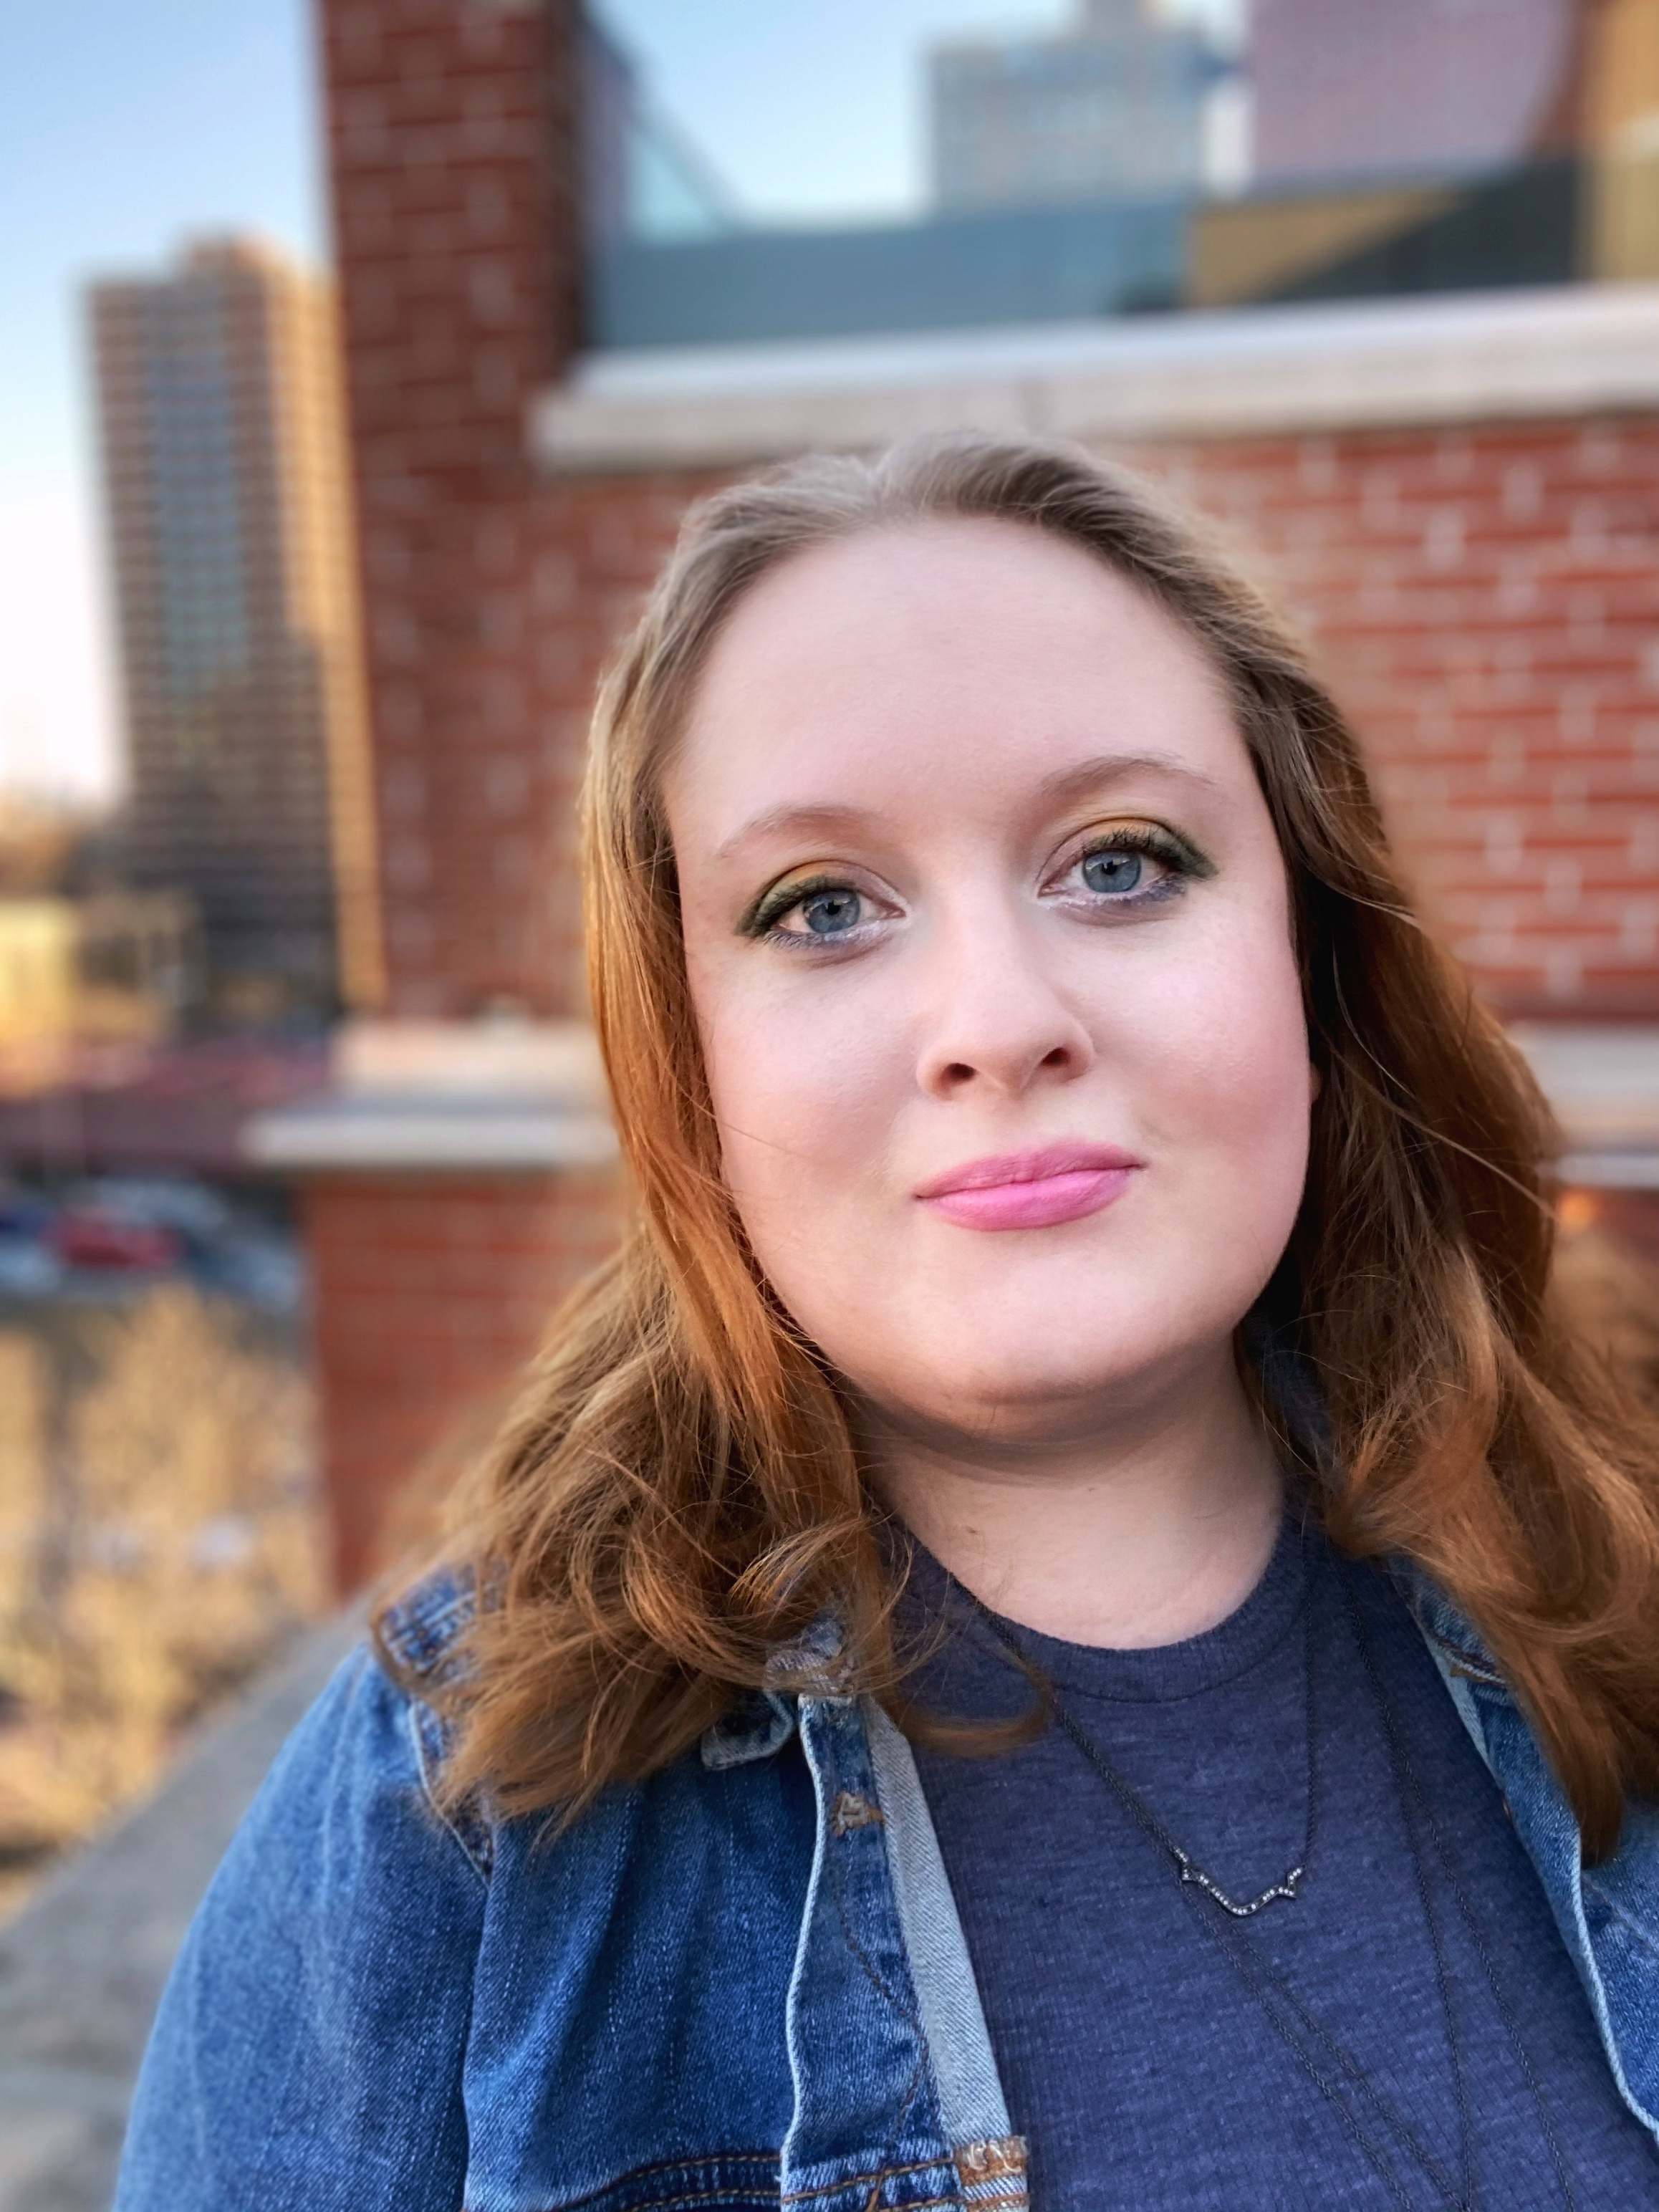 Image of founder Savvy Gatton. White woman with mid-length red wavy hair, blue eyes, and a round face. She is wearing a blue shirt, denim jacket, and black layered necklace. 